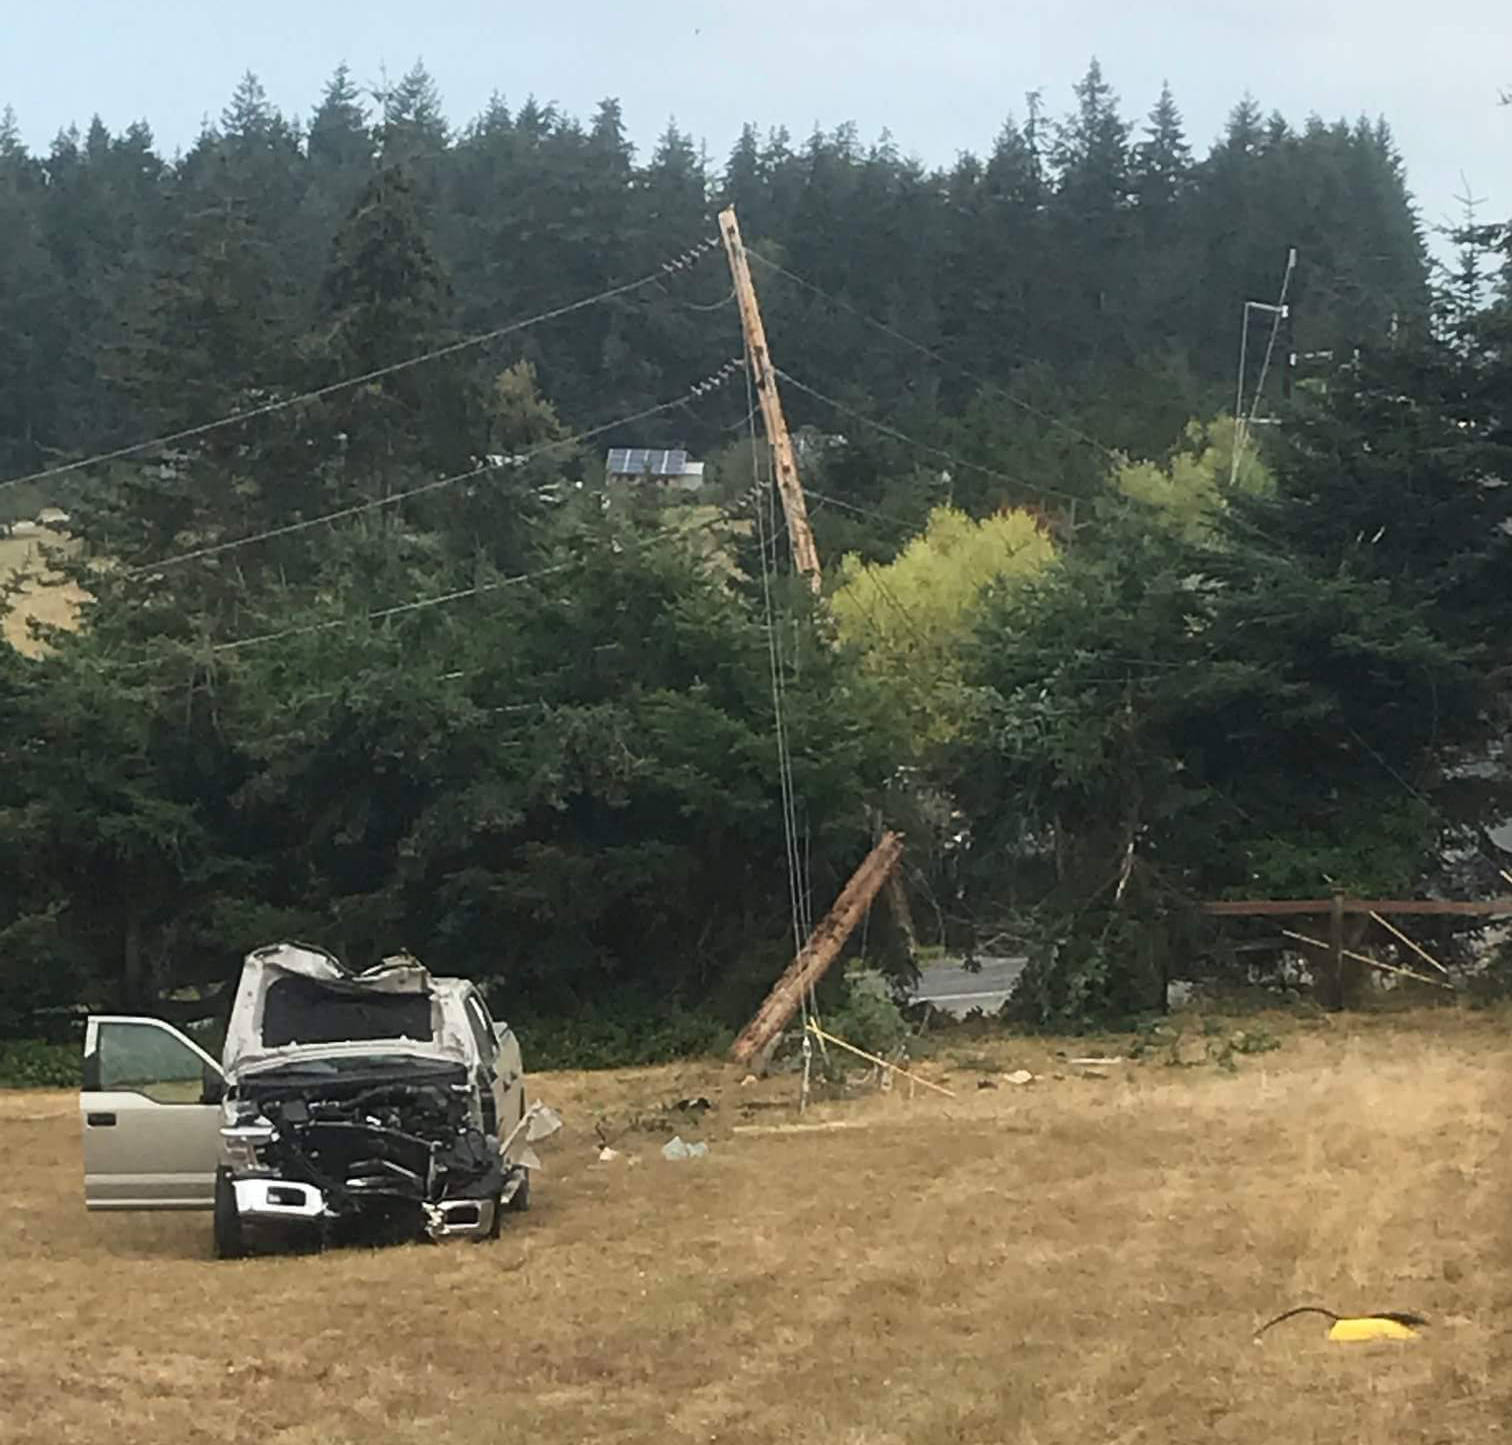 Contributed photo/OPALCO                                A medical emergency caused a truck to hit a transmission pole on Lopez Island, which also caused a grass fire. The driver was flown off the island for observation and to treat relatively minor injuries.